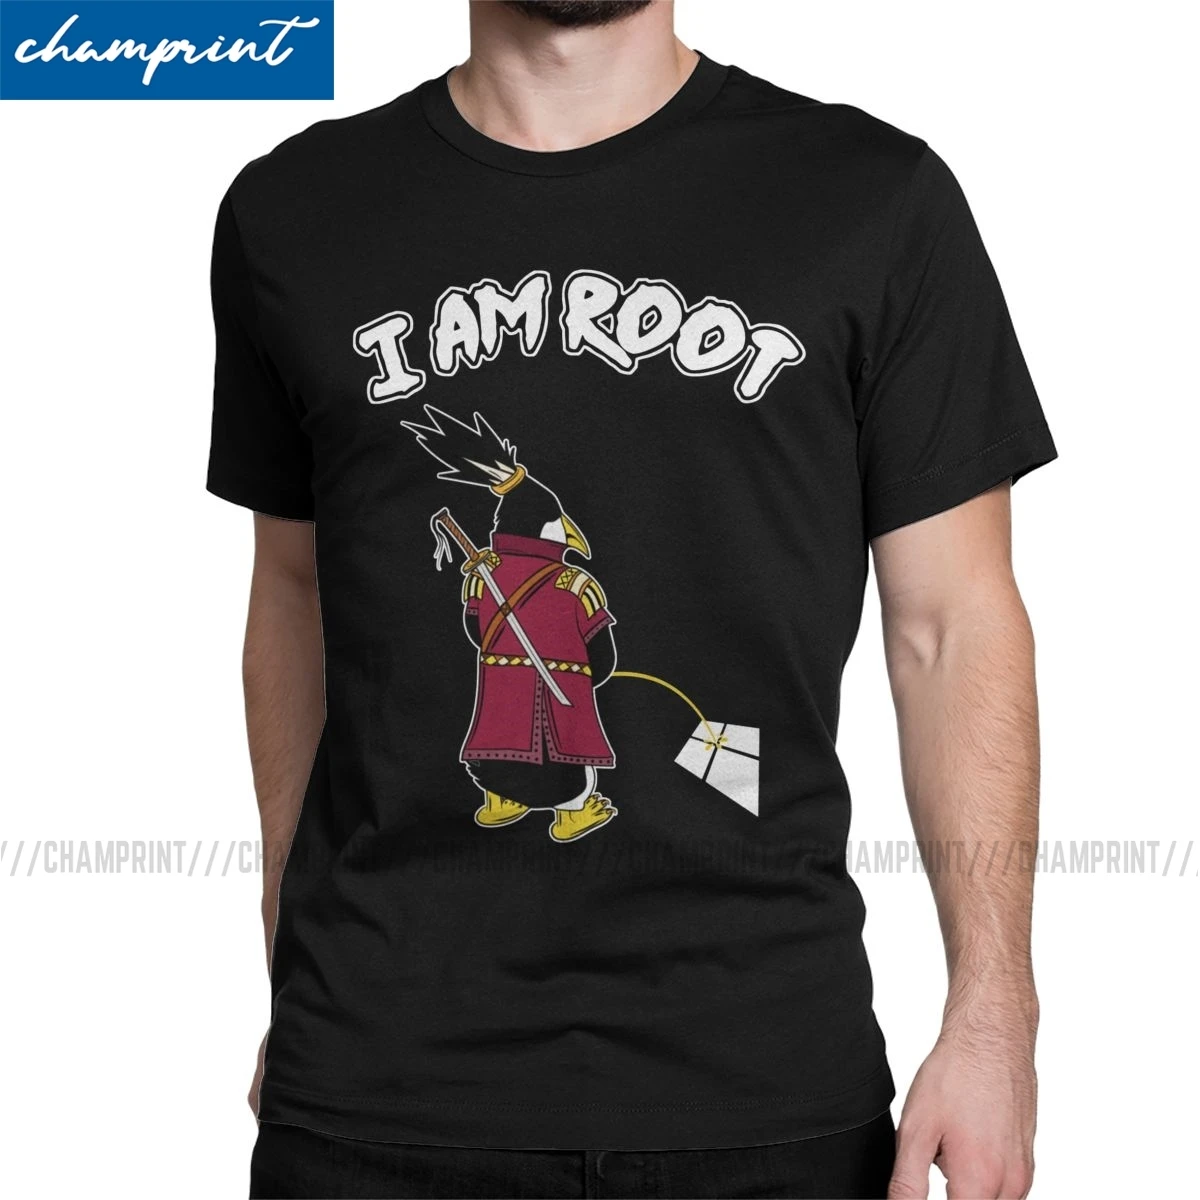 I am rooted. Samurai Programmer. I am root. I am root Penguin.